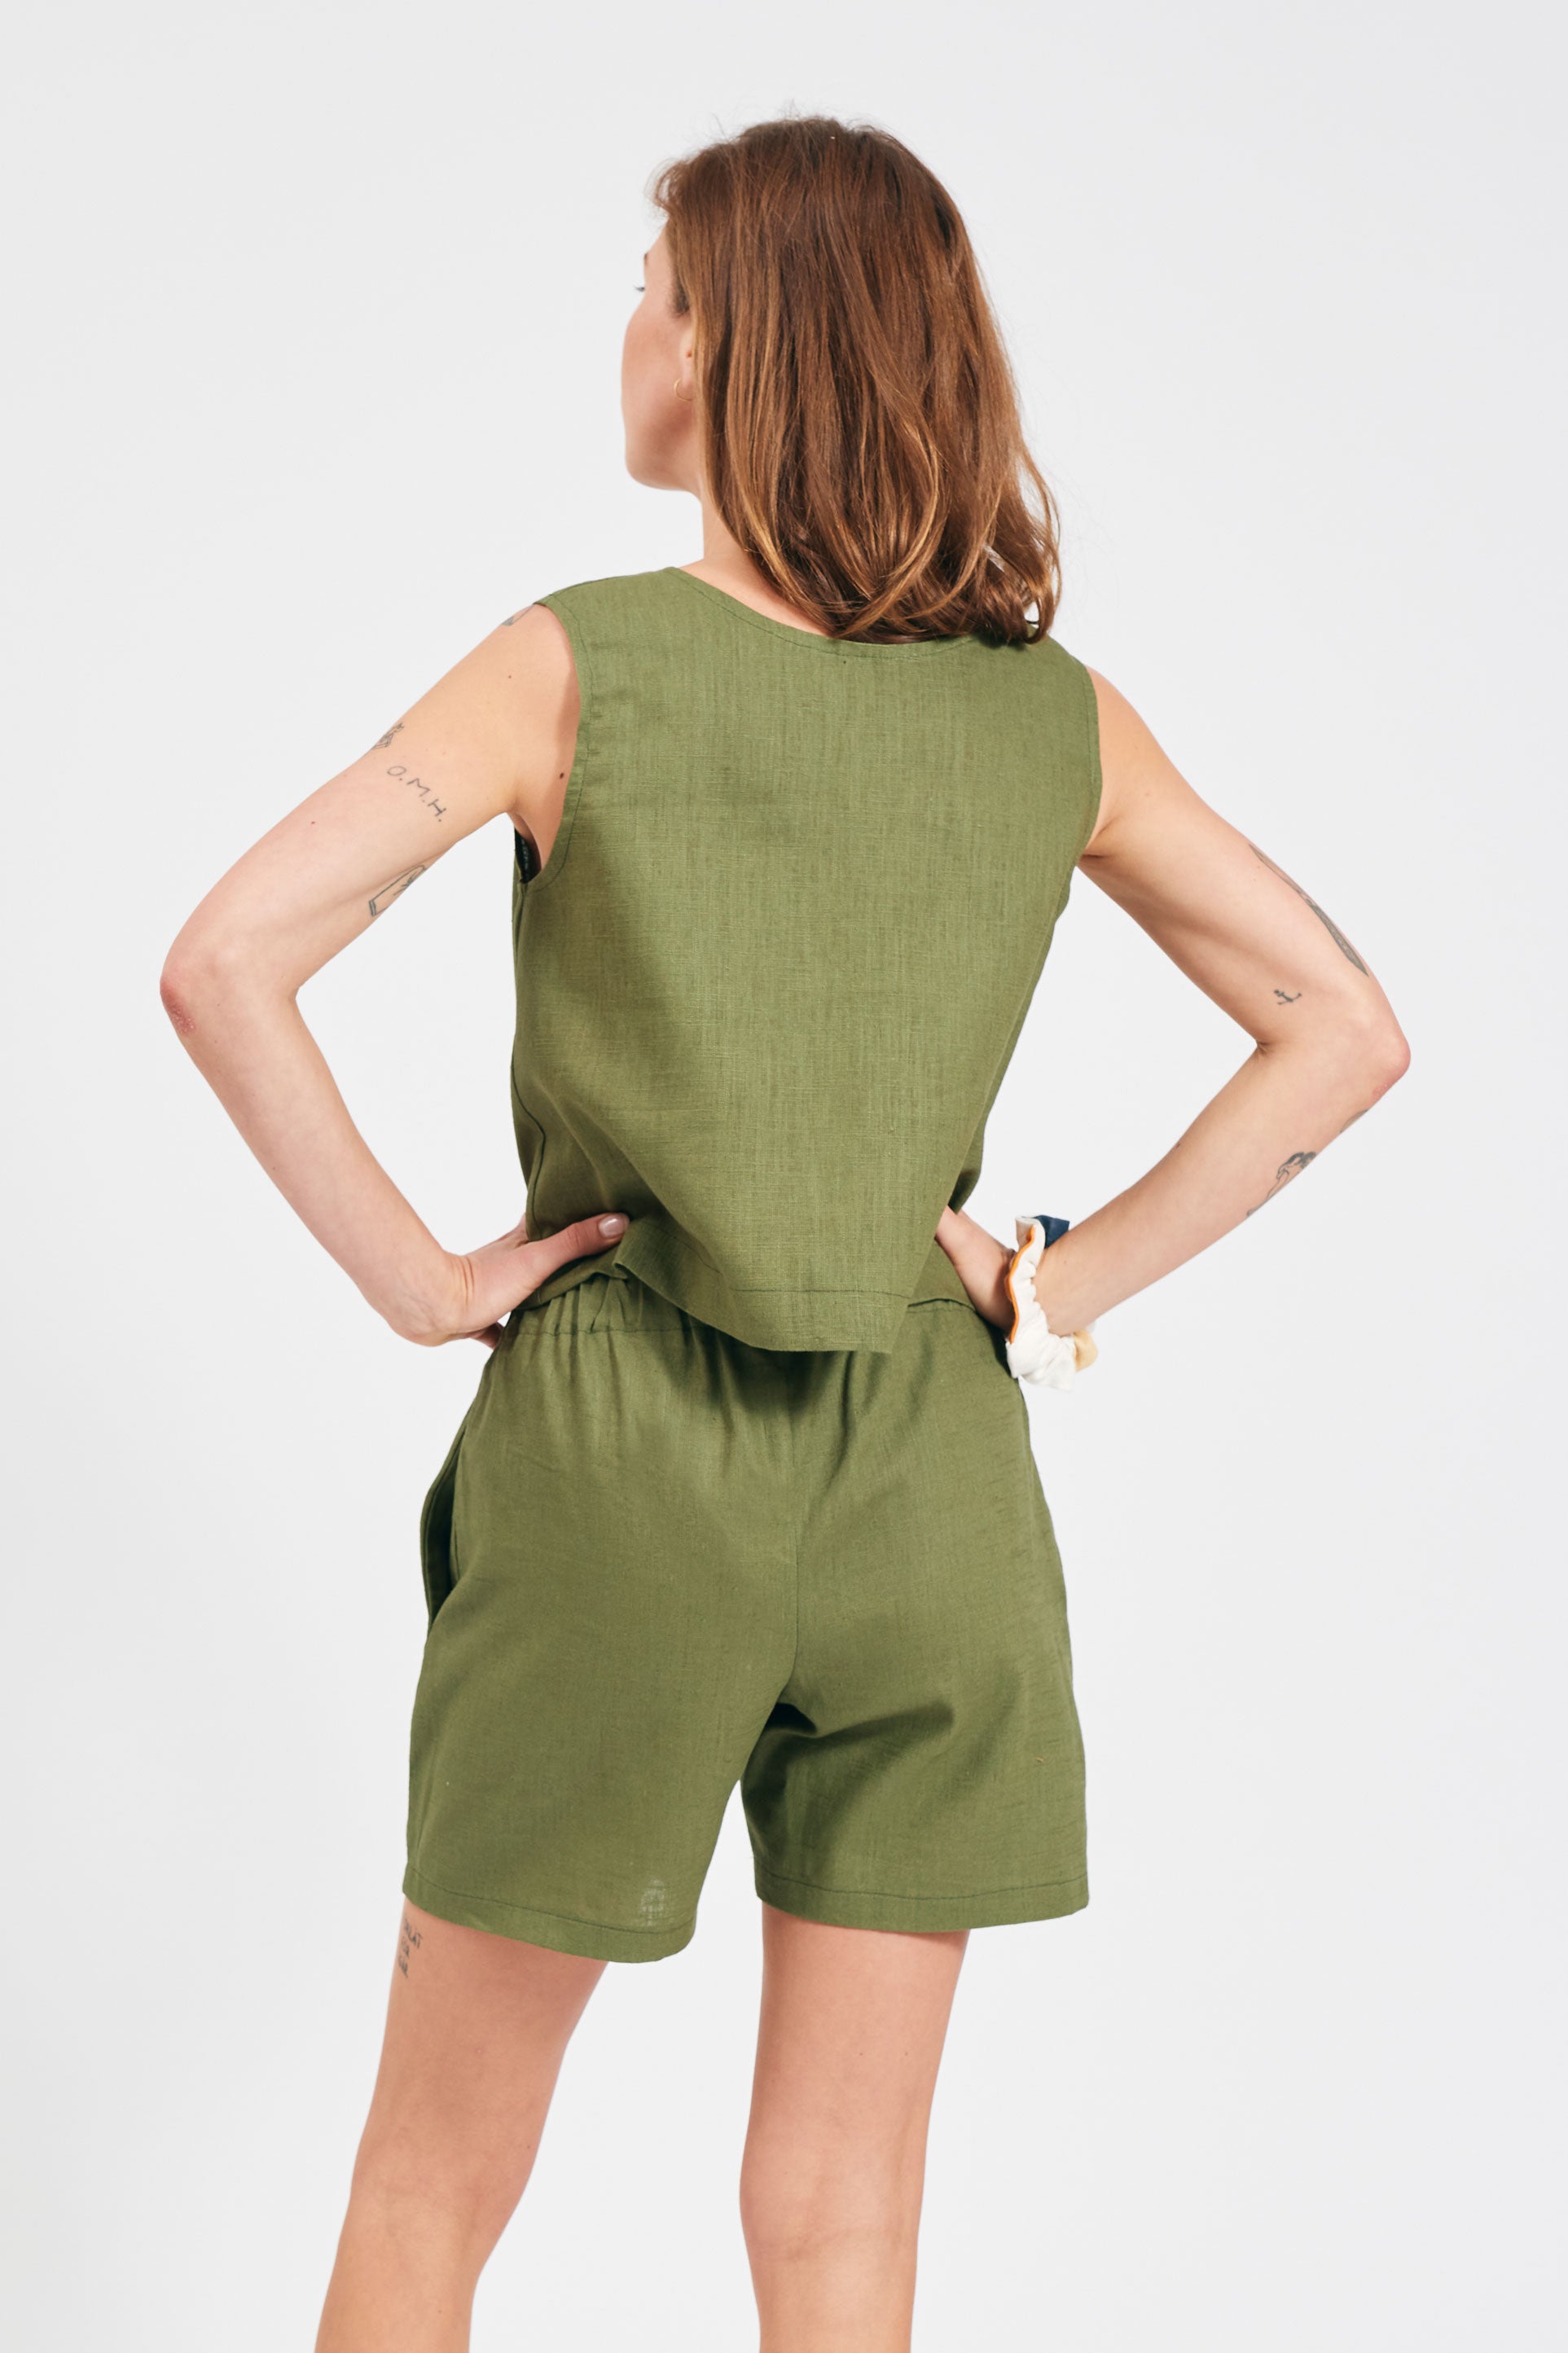 SHIO Switch Top arrives in 100% upcycled cotton and 100% linen.